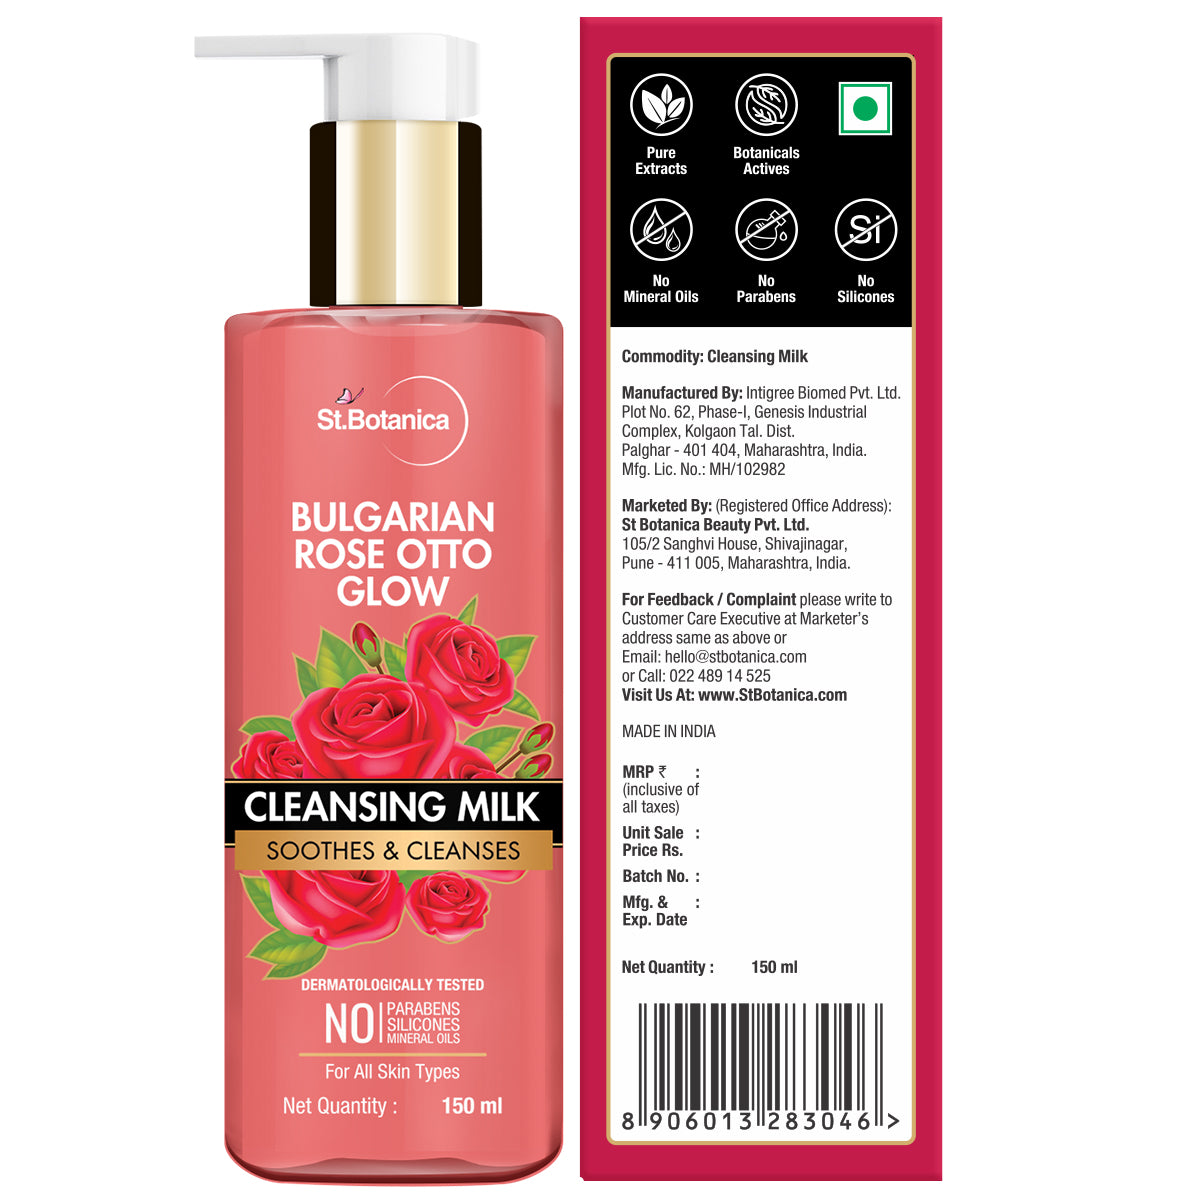 St.Botanica Bulgarian Rose Otto Glow Cleansing Milk Soothes & Cleanses No Paraben & Sls, 150 ml (STBOT679)